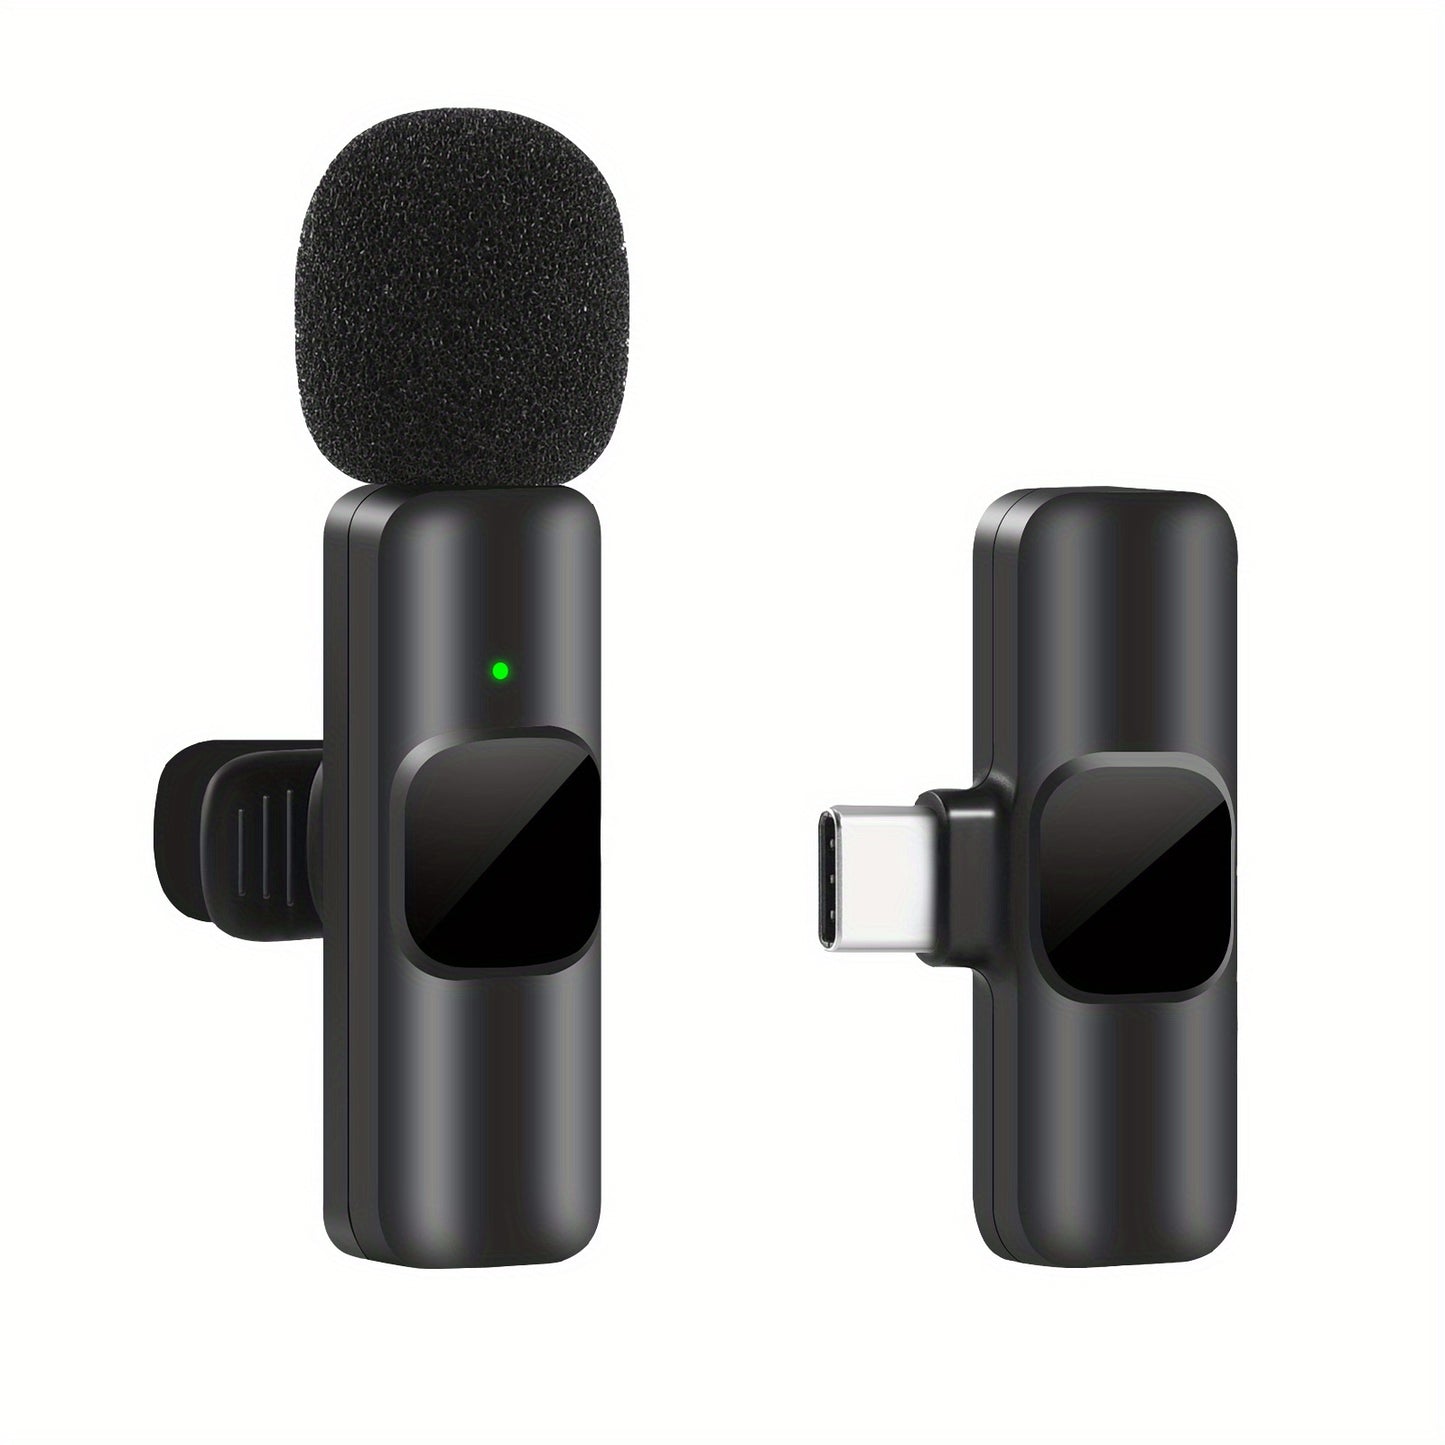 Wireless Lapel Microphone For IPhone IPad Professional Wireless Clip Mic - Cordless Omnidirectional Condenser Recording Mic For Interview Video Podcast Vlog YouTube